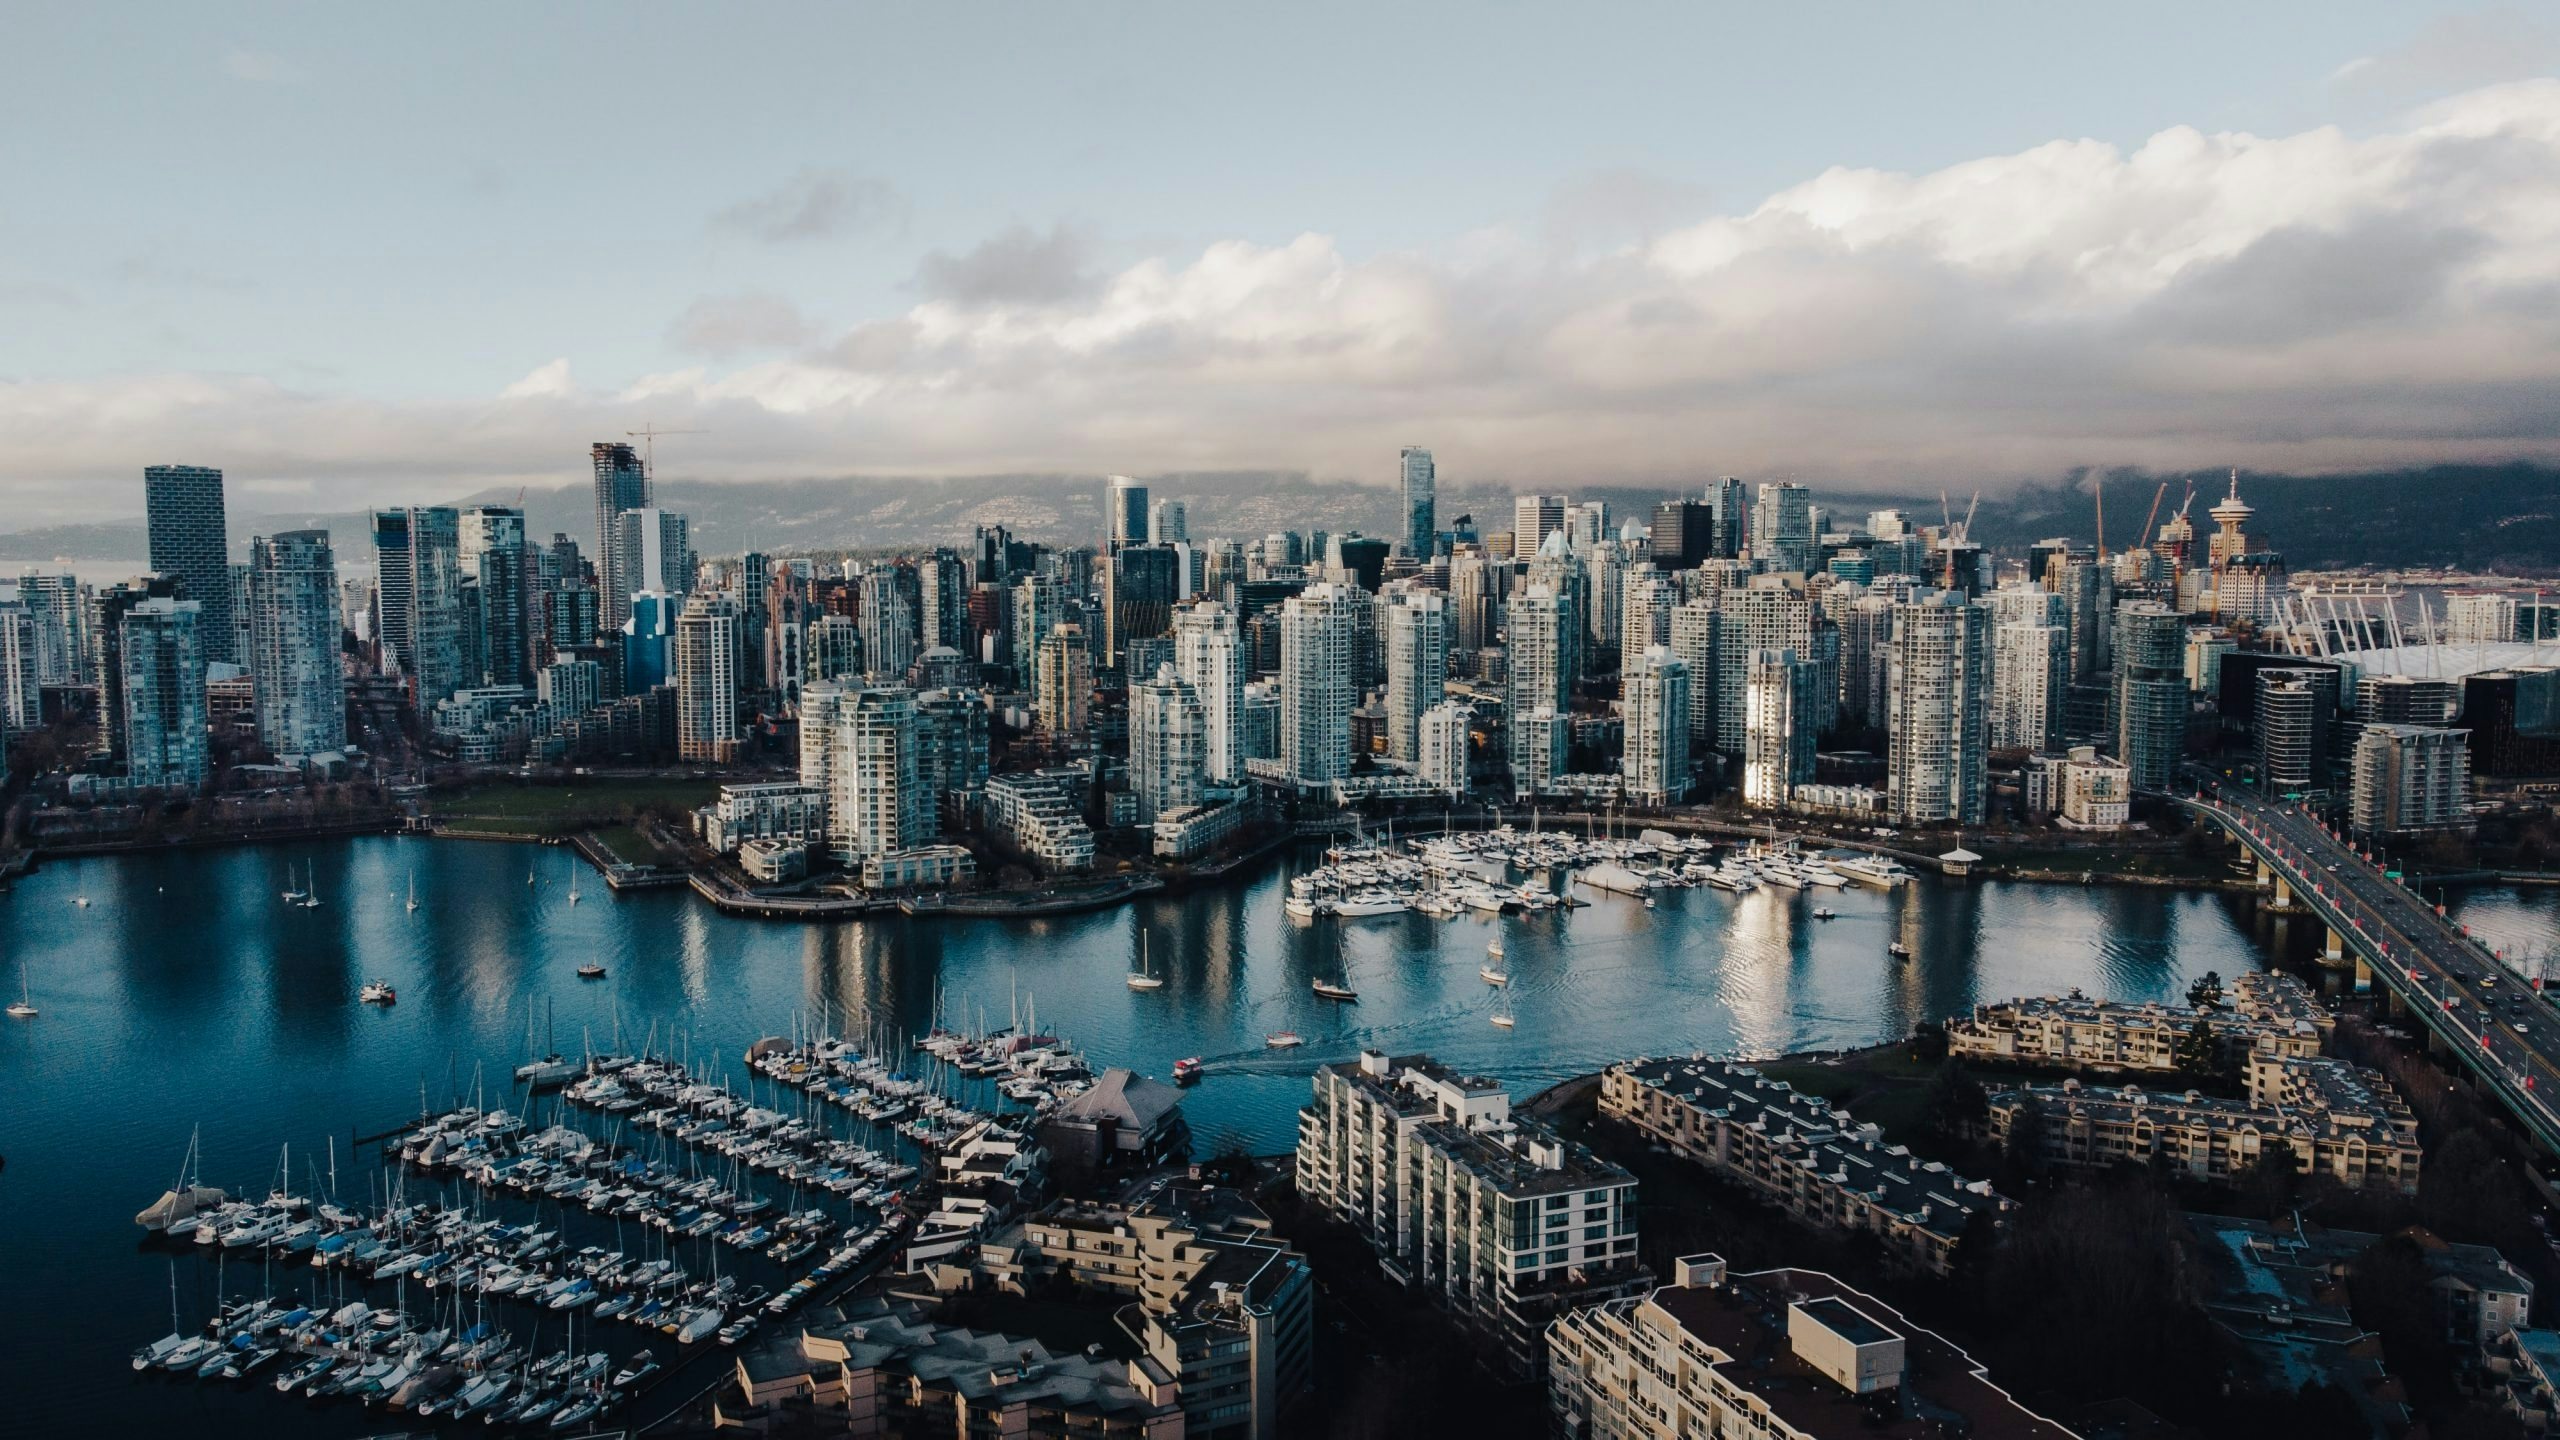 Realtors and Chinese clients are rushing to close property deals in Vancouver ahead of Canada’s nation-wide ban on foreign home buyers, as more Chinese are looking to move to Vancouver amid China’s pandemic lockdowns. Photo: Unsplash